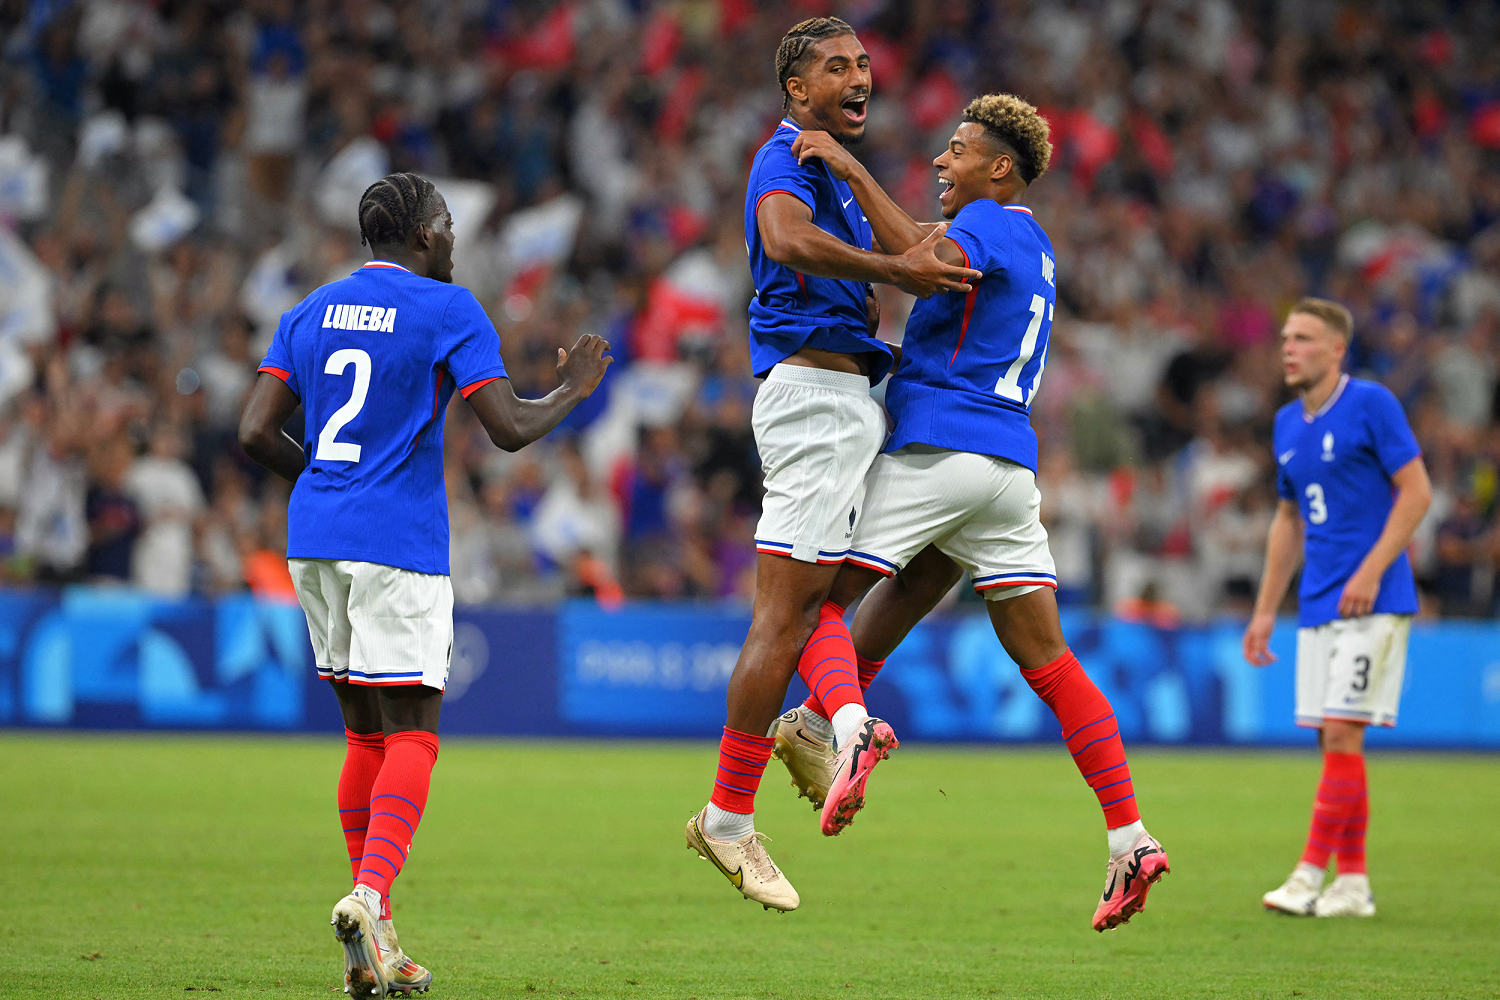 France cruises to 3-0 win against U.S. on opening day of Paris Olympics